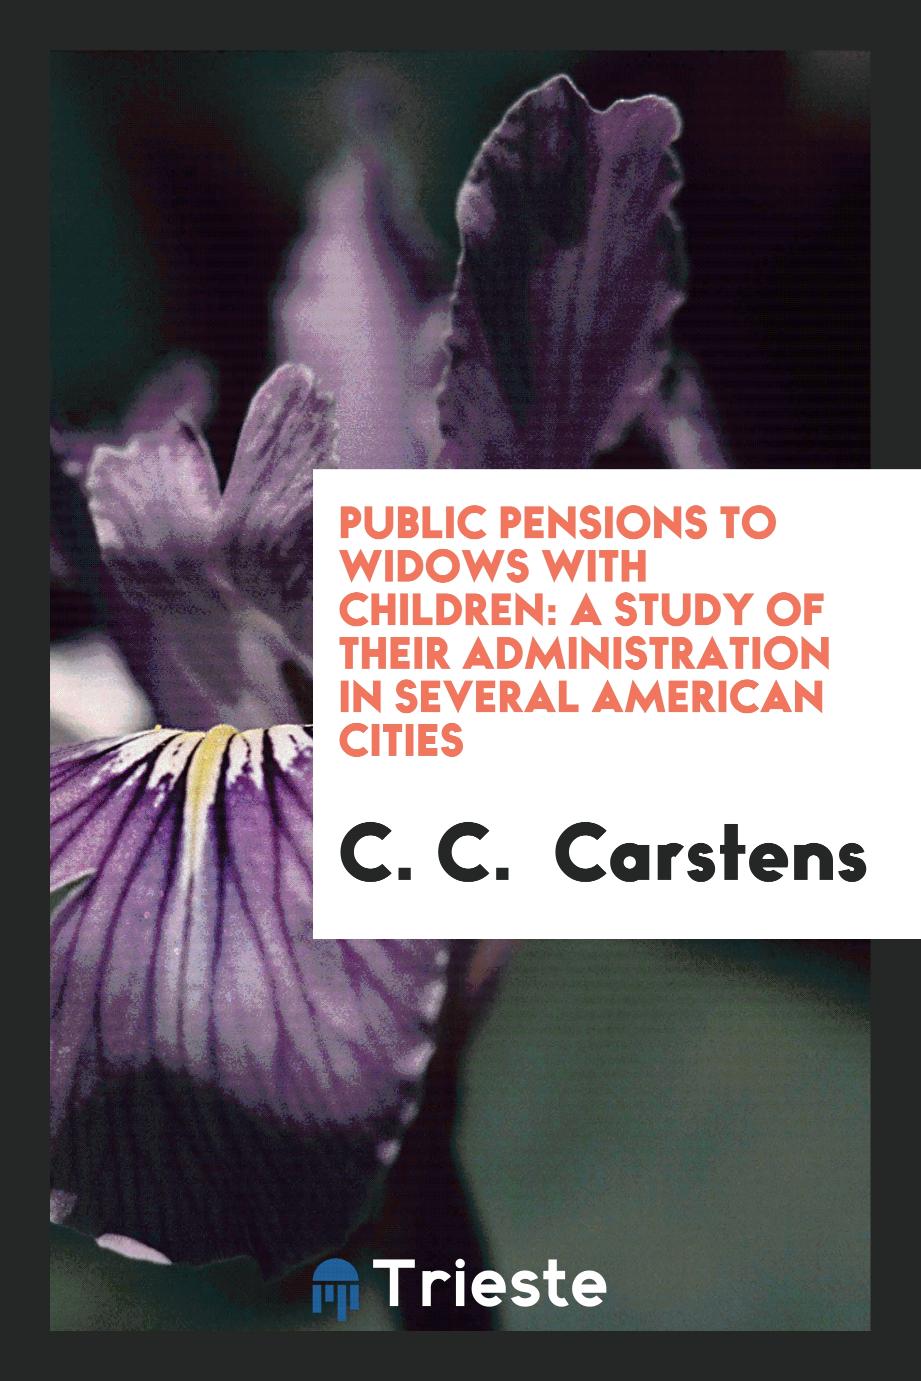 Public Pensions to Widows with Children: A Study of Their Administration in several American cities